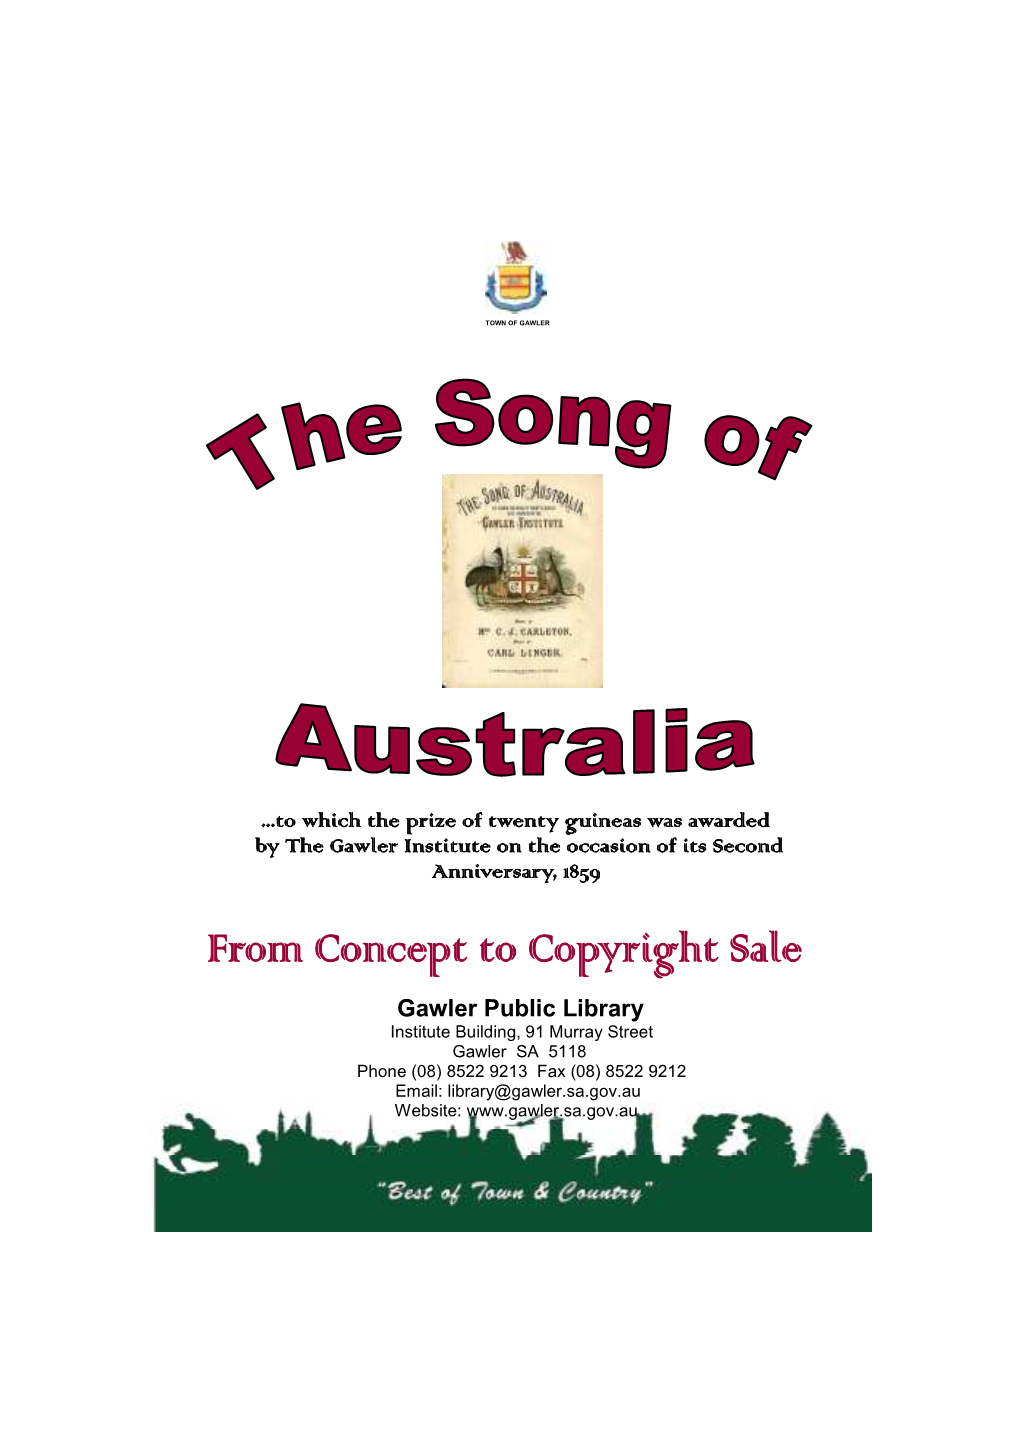 The Song of Australia 2 for Conversion